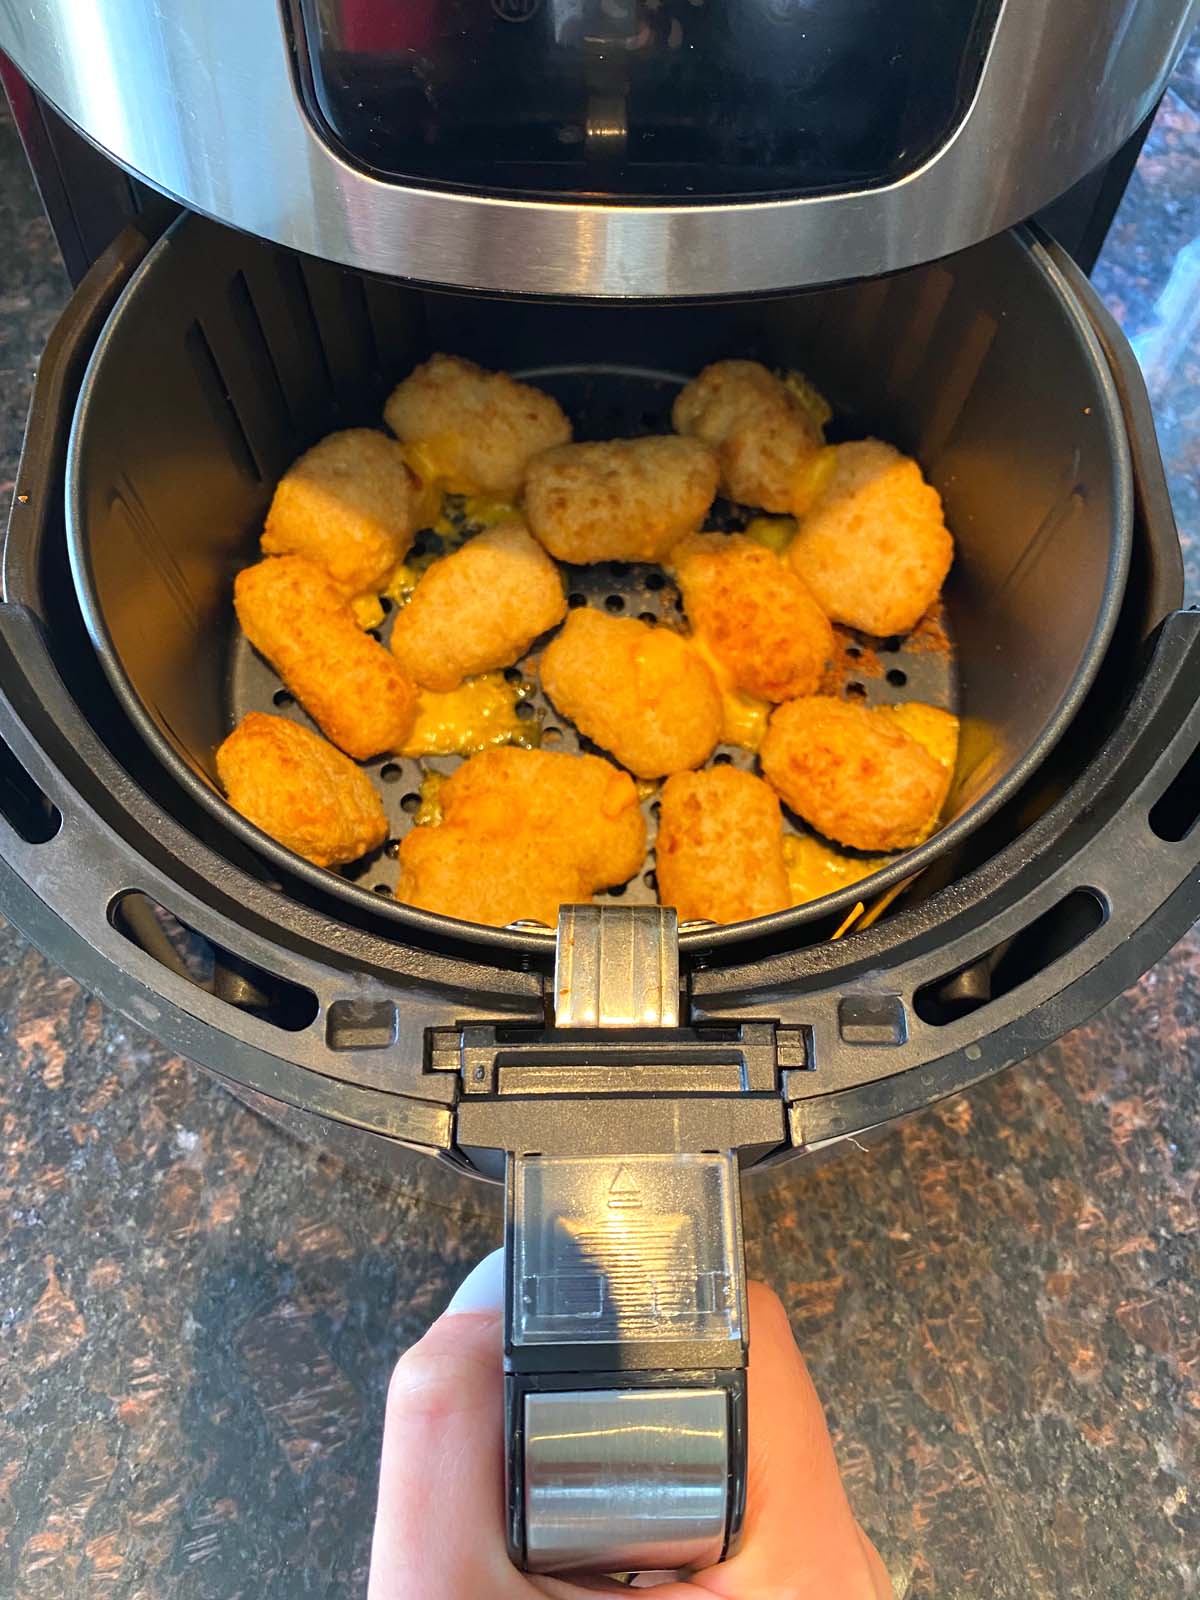 Cooked mac and cheese bites in an air fryer.